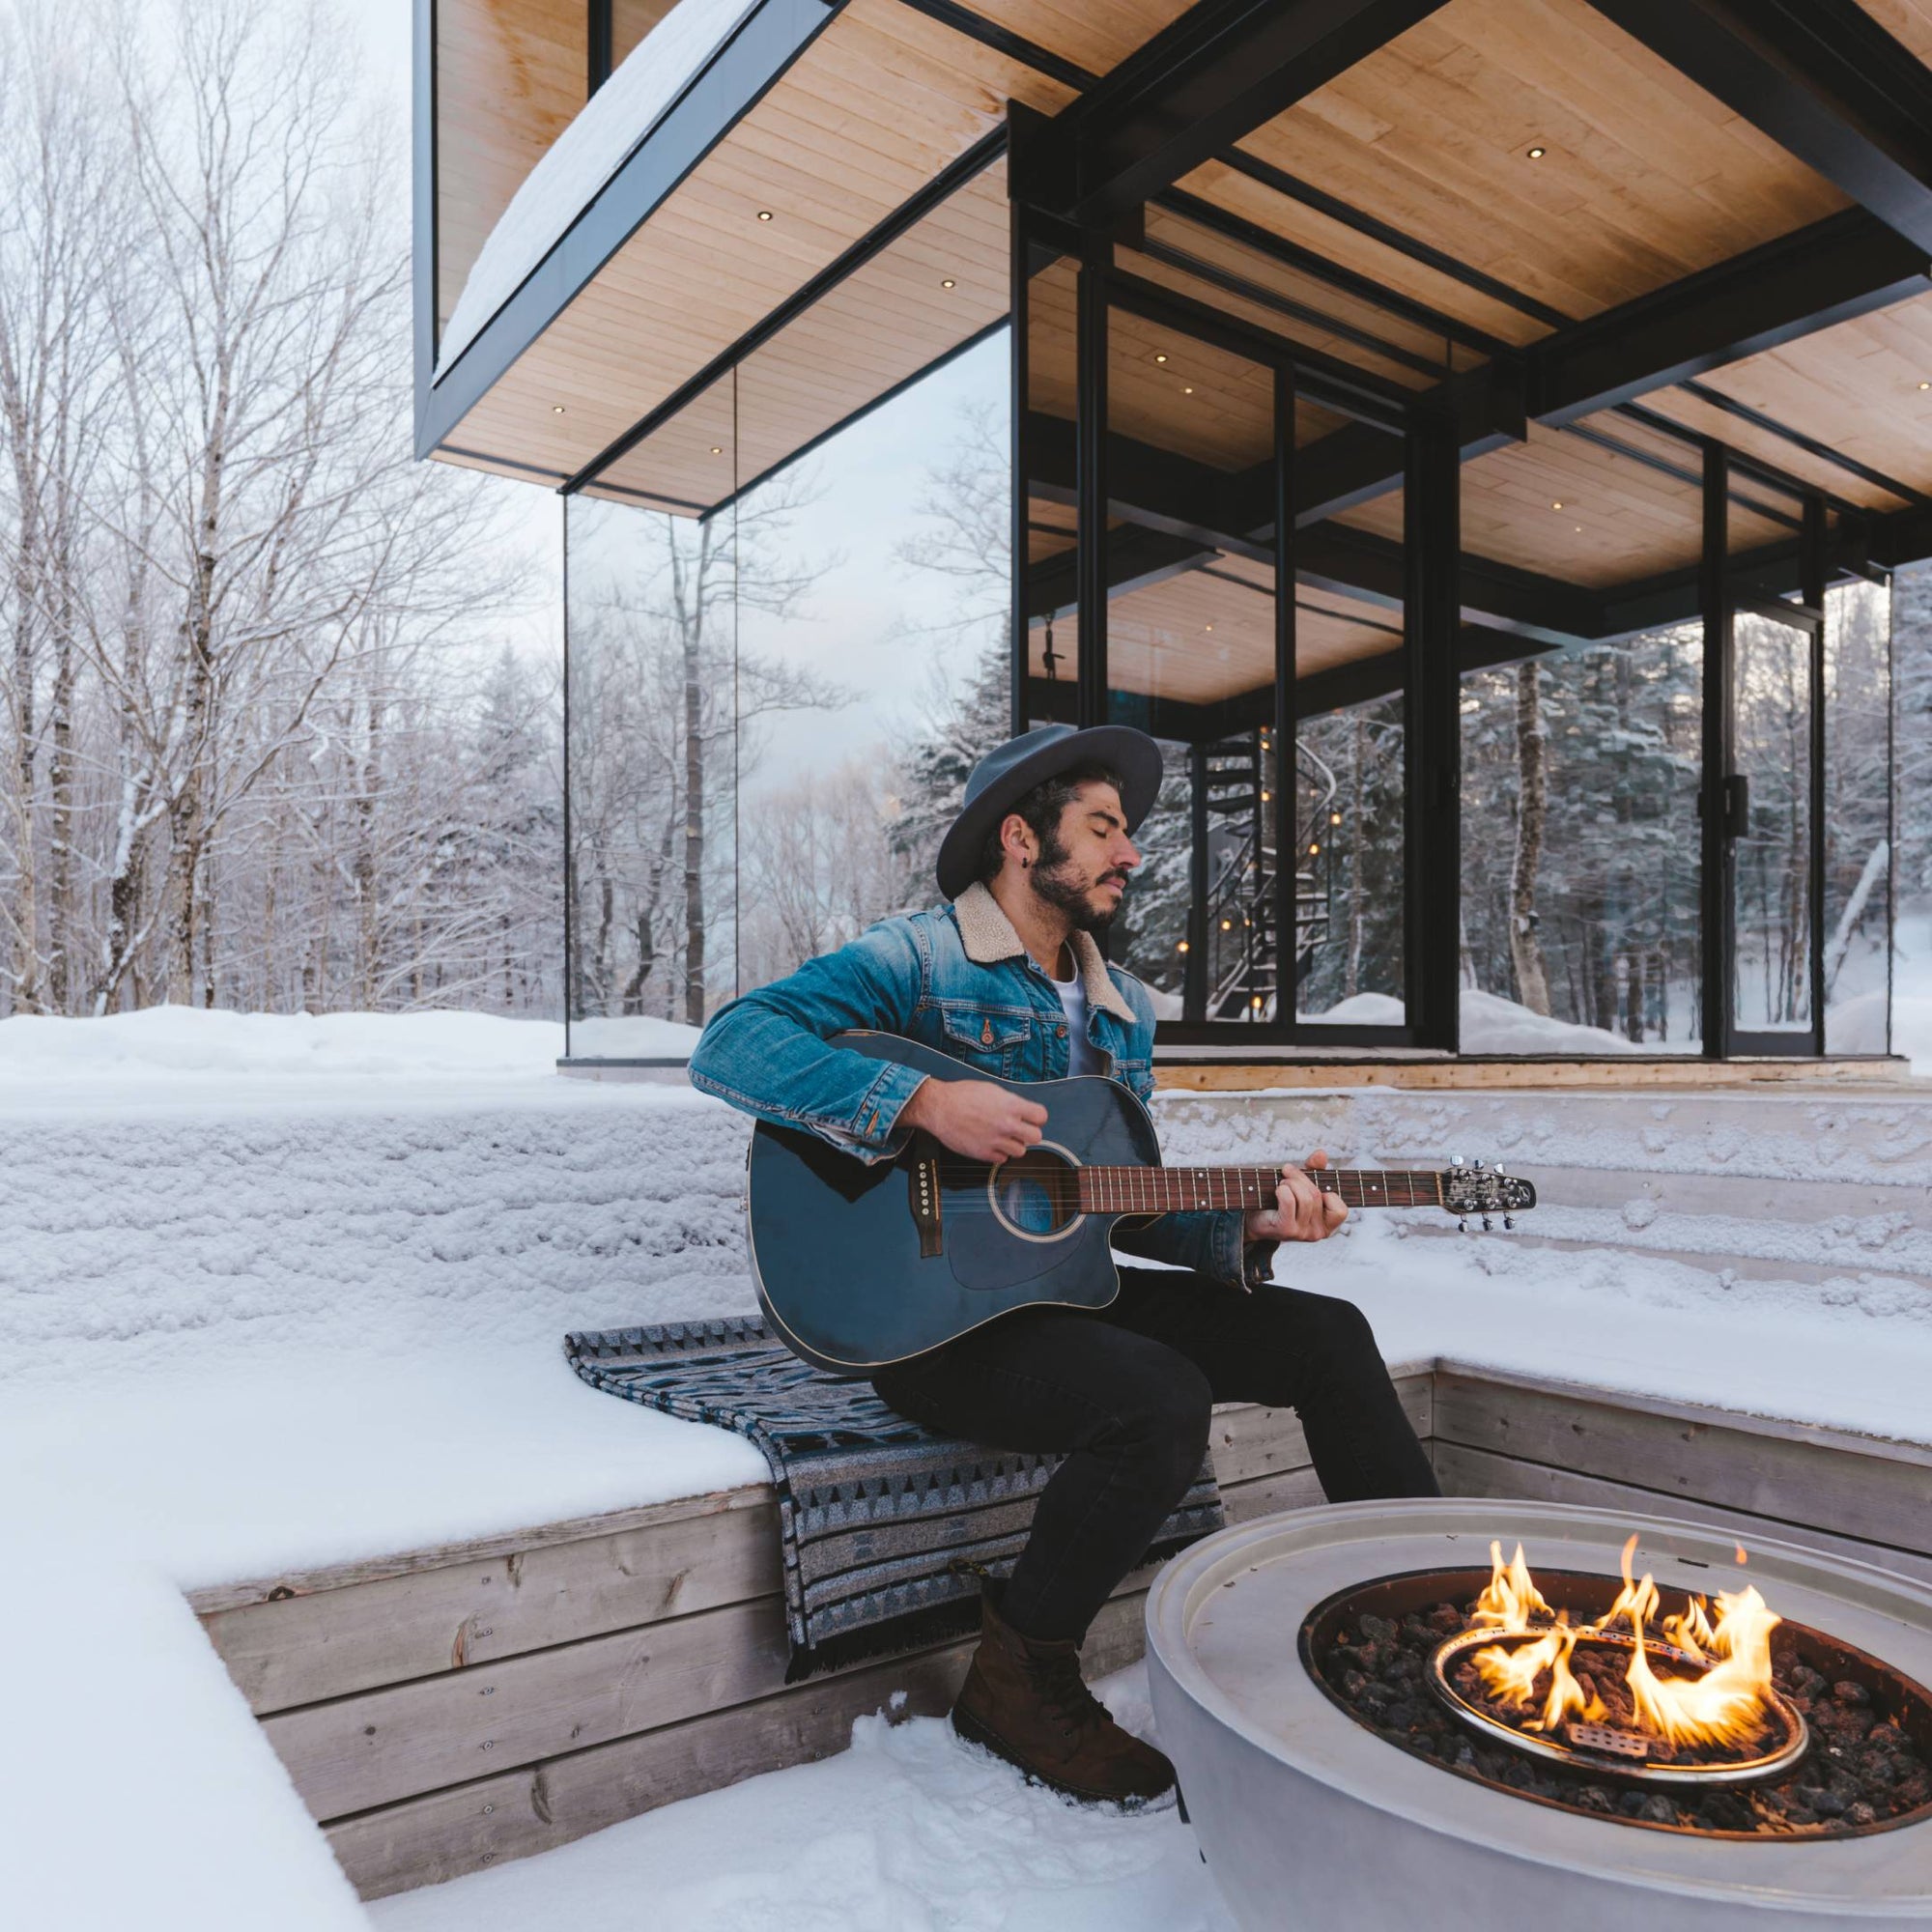 Jenna's partner sits by the outdoor fire pit in the snow while playing his guitar